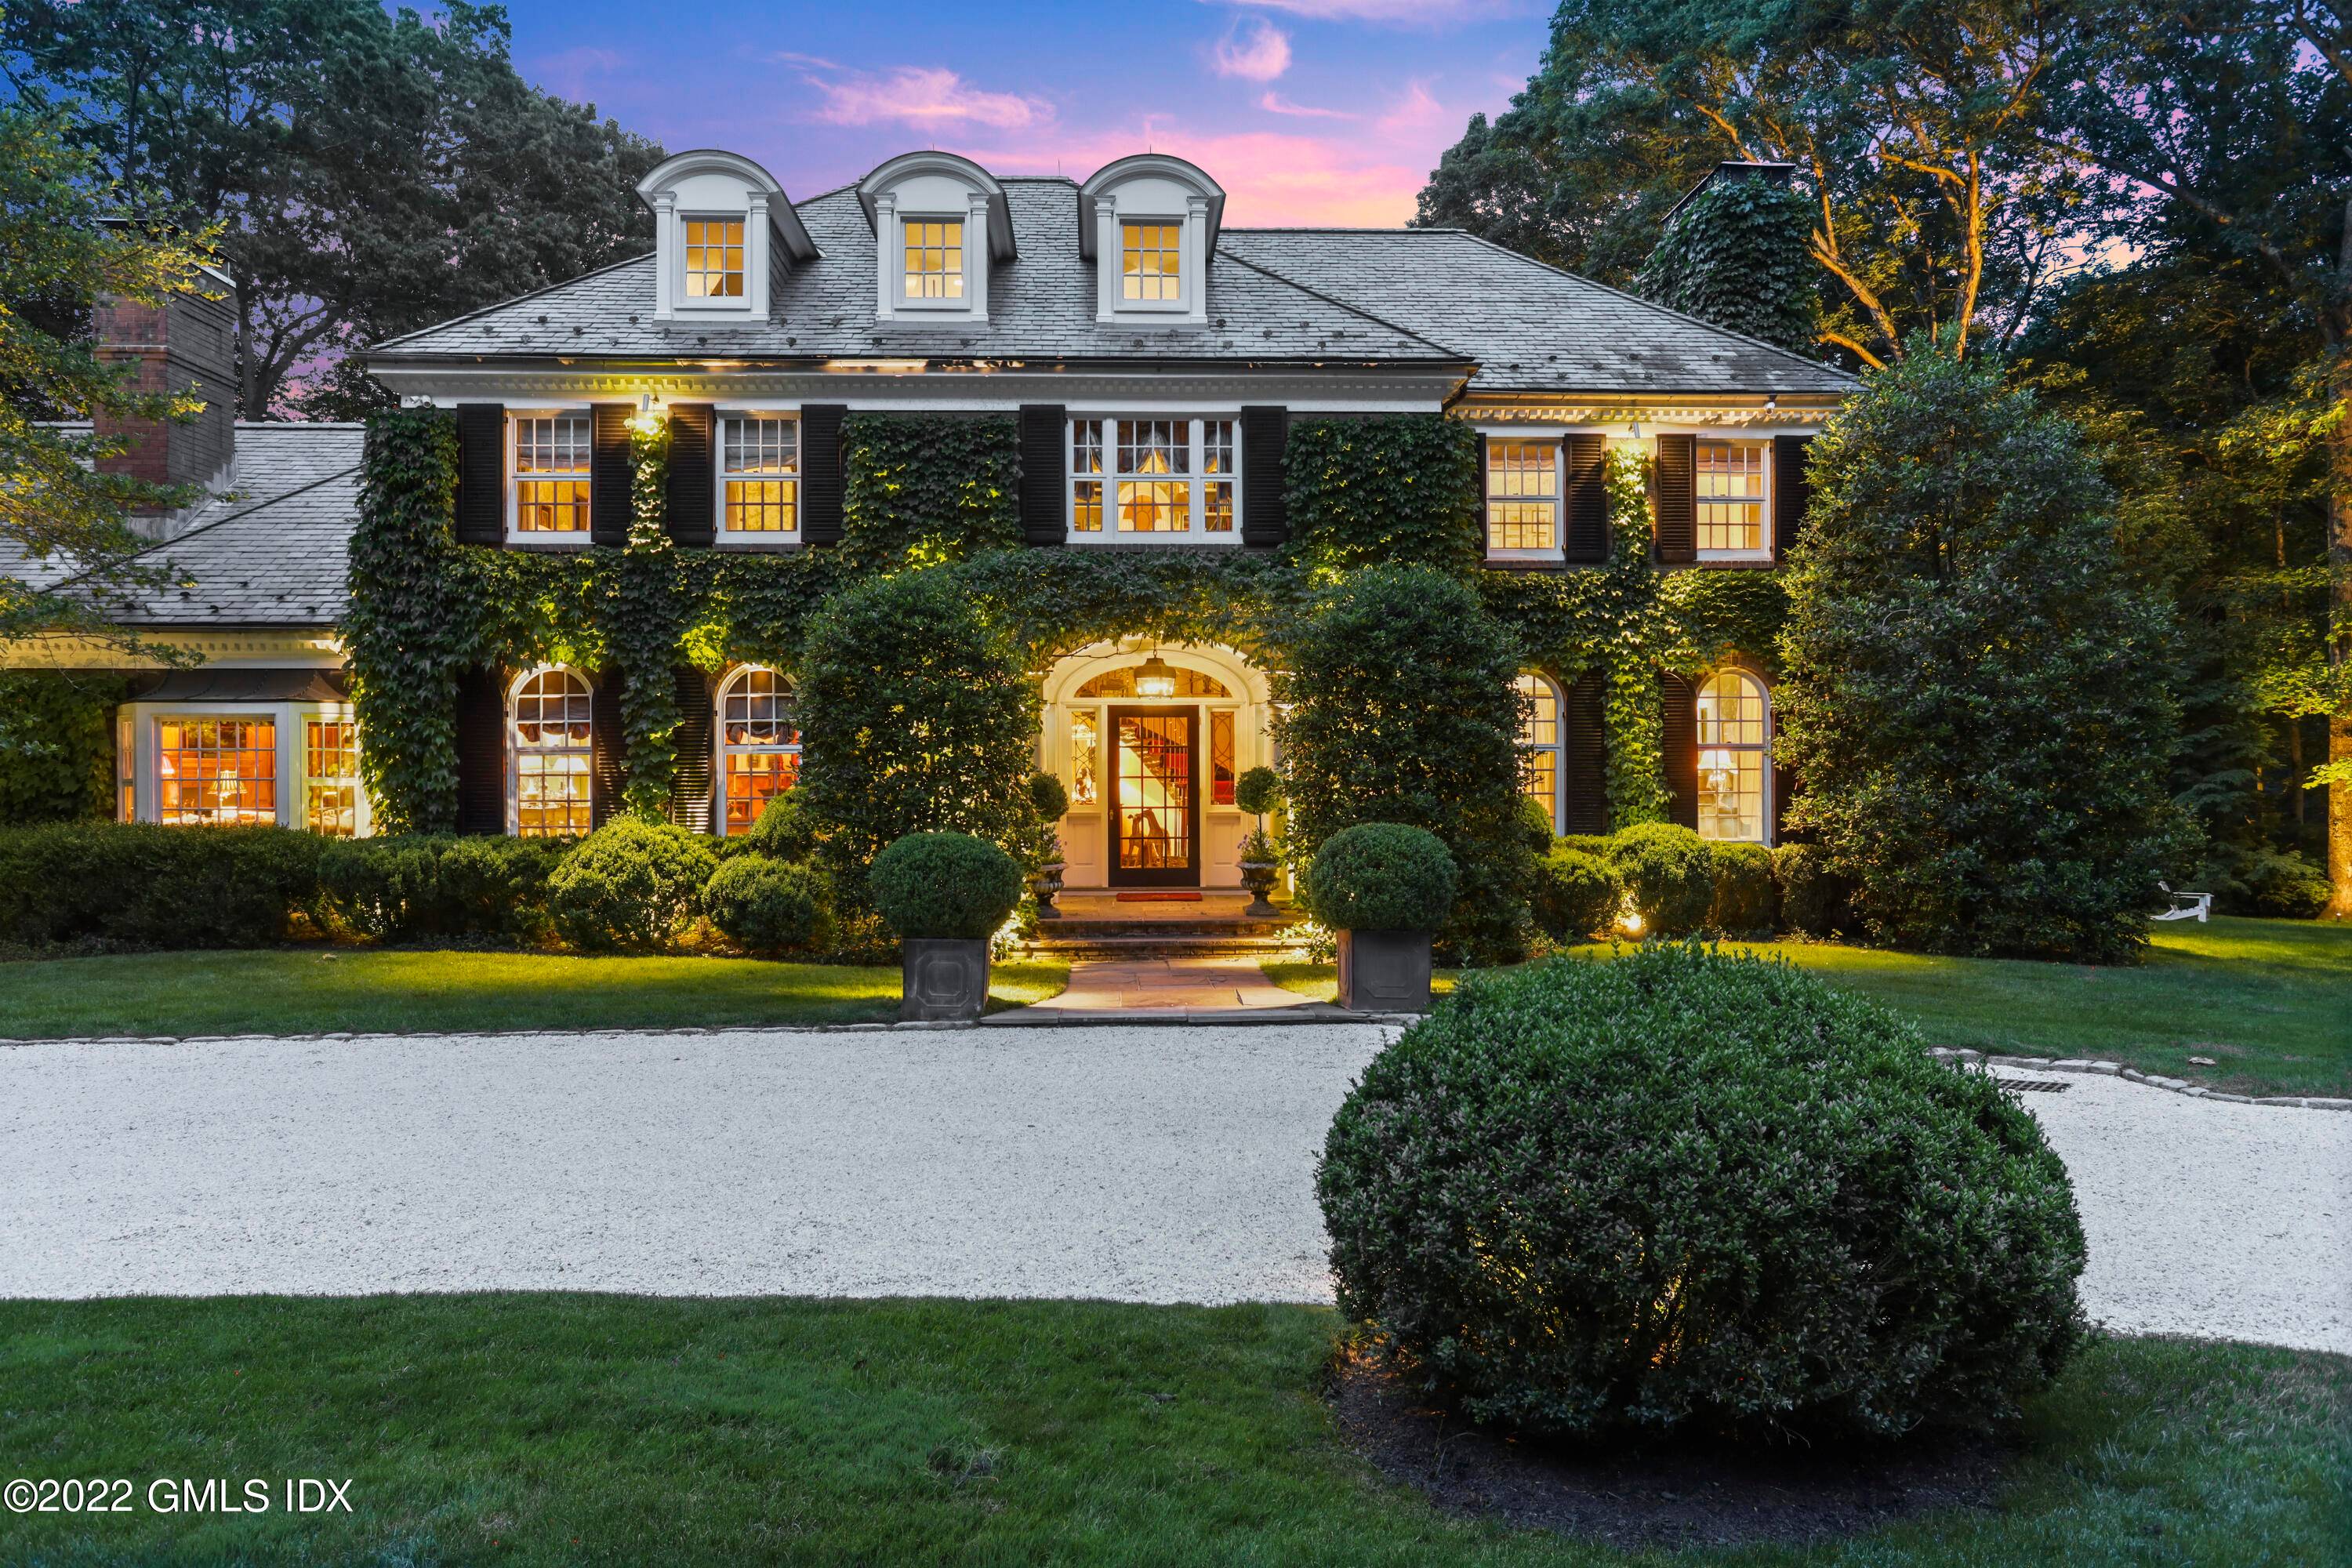 Majestic four bedroom Georgian Colonial graces two private acres with expansive stone terrace and pool tucked back off a coveted lane close to town.